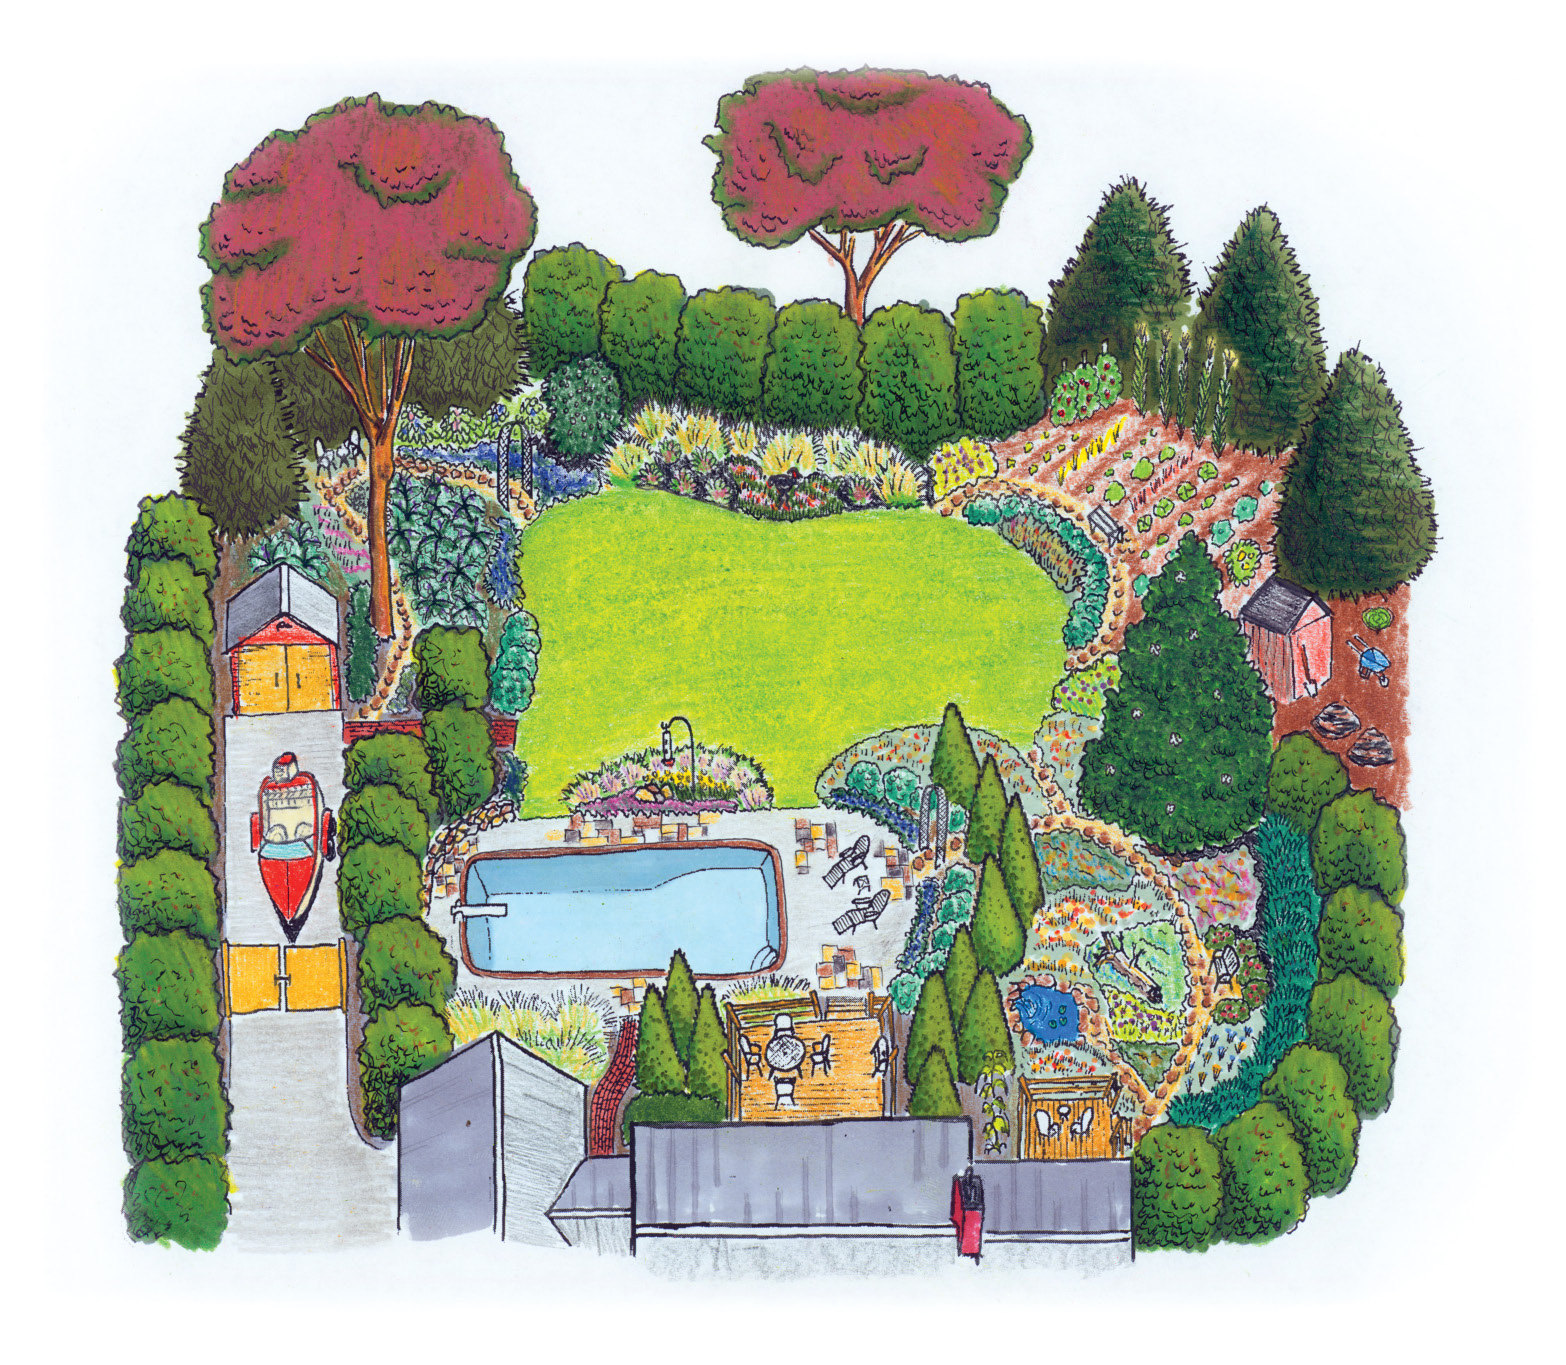 Drawing of a home’s backyard landscape, with a pool, boat area, and various trees, shrubs, and other plantings.